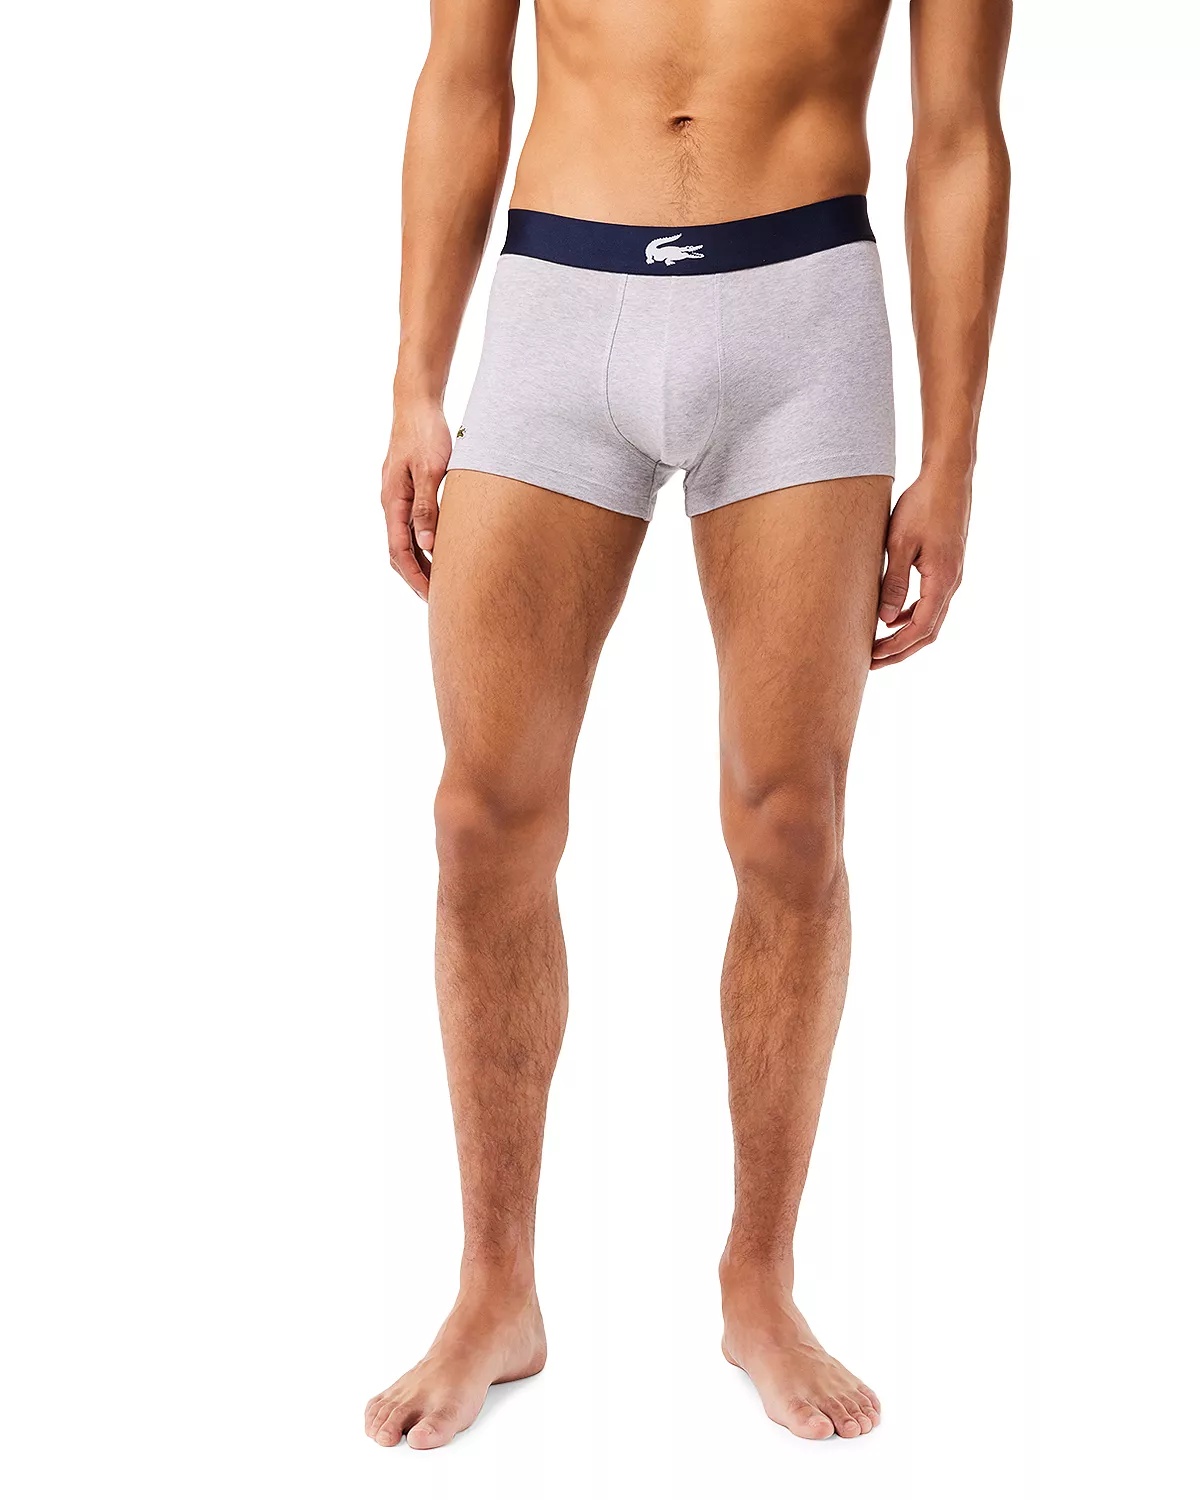 Cotton Stretch Trunks, Pack of 3 - 2